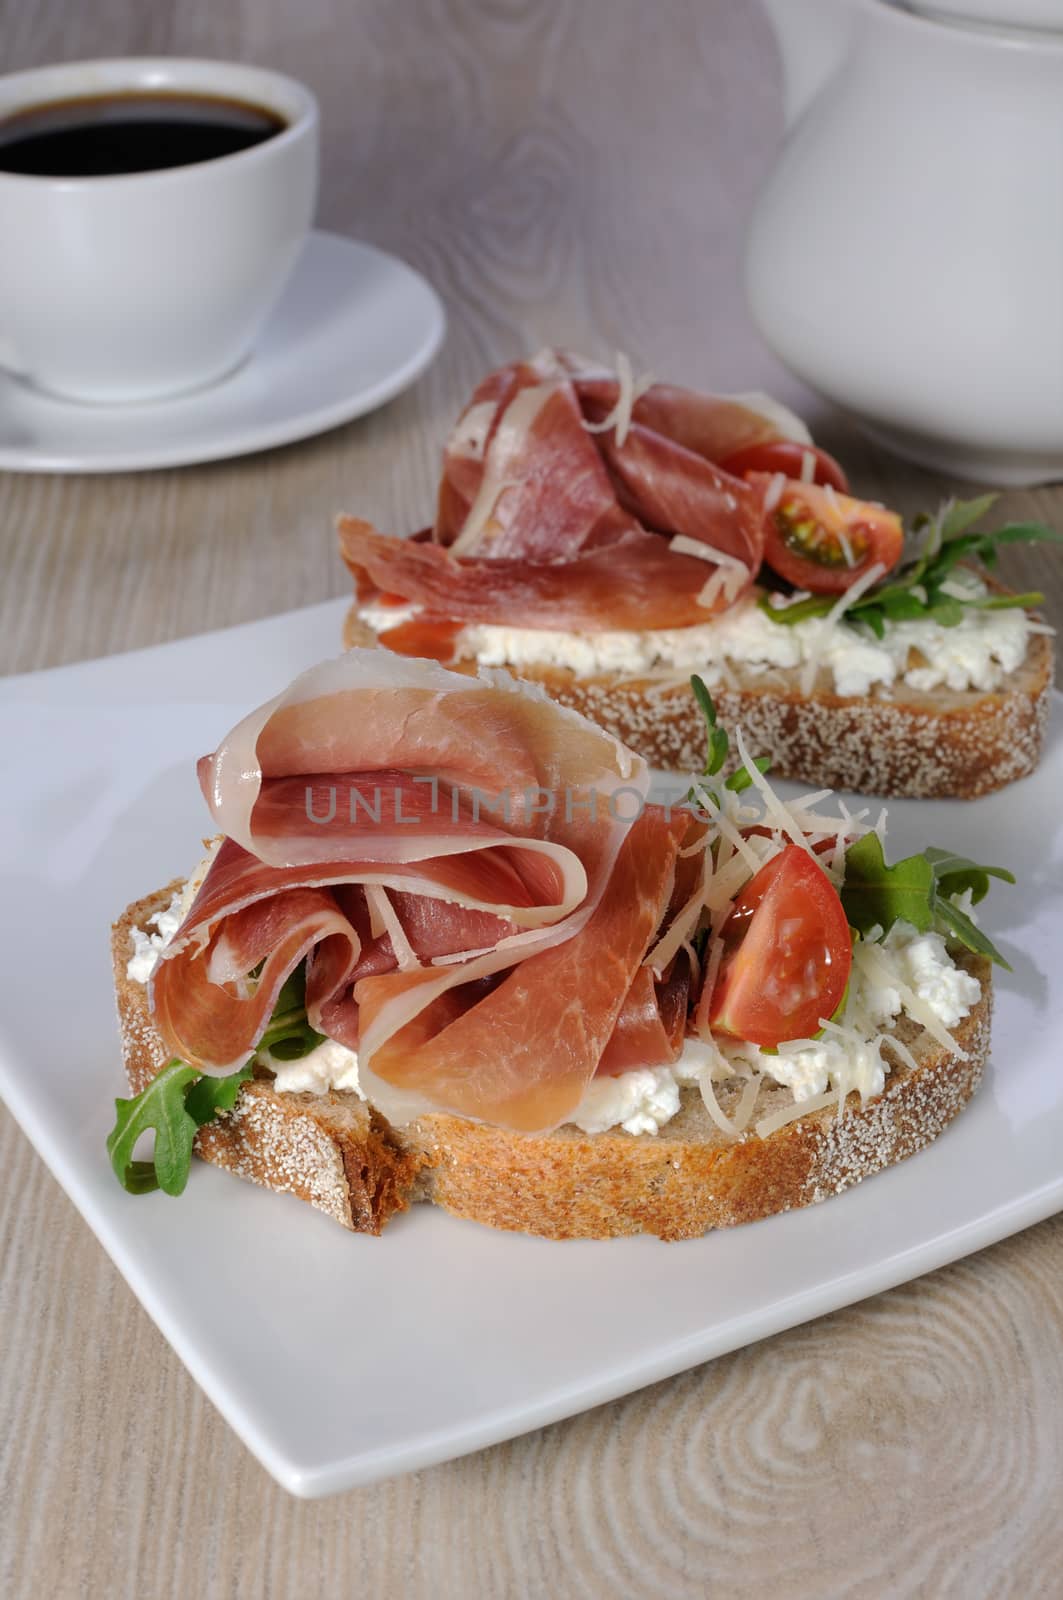 Sandwich of jamon with ricotta, arugula and cheese by Apolonia